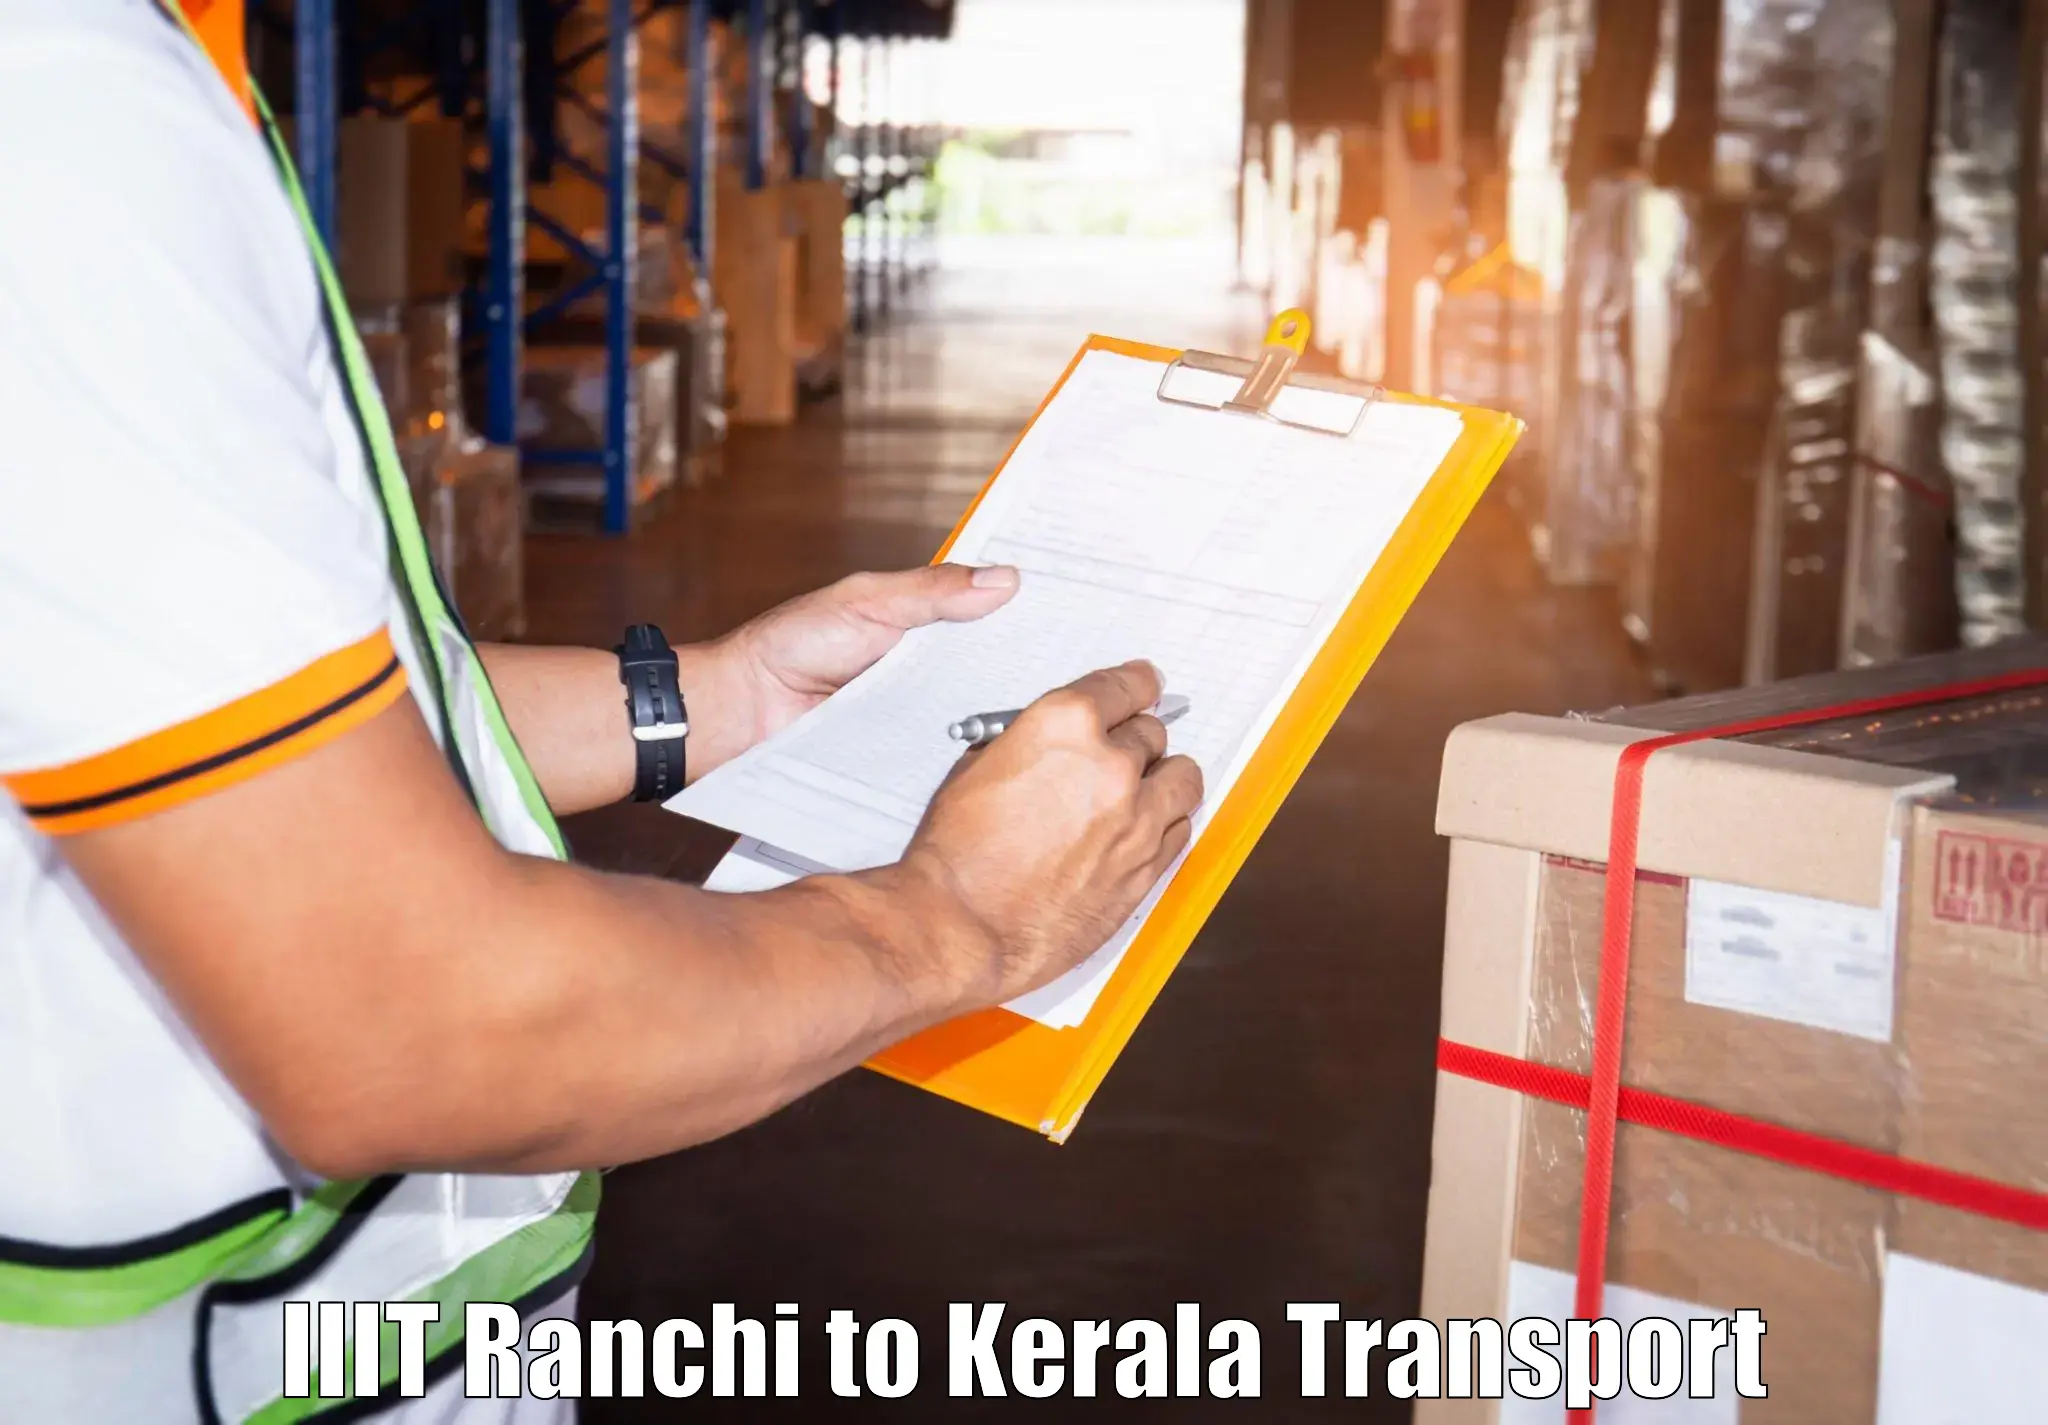 Nationwide transport services IIIT Ranchi to Kerala